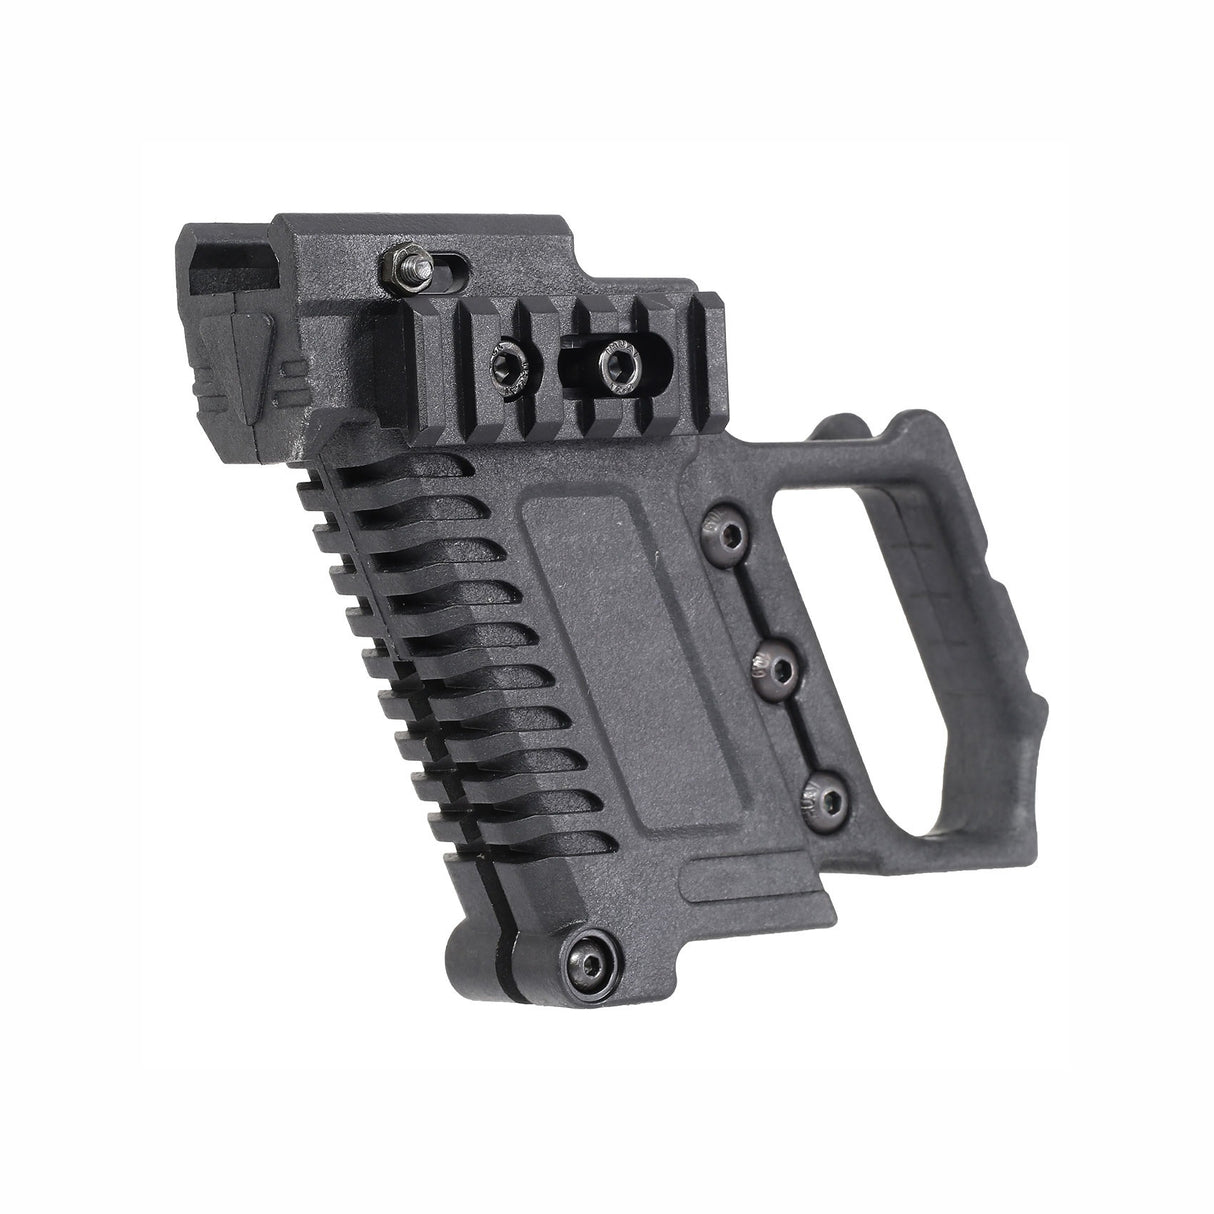 Double Bell Tactical Loading Kit of G-Series Pistol ( HM0333 )